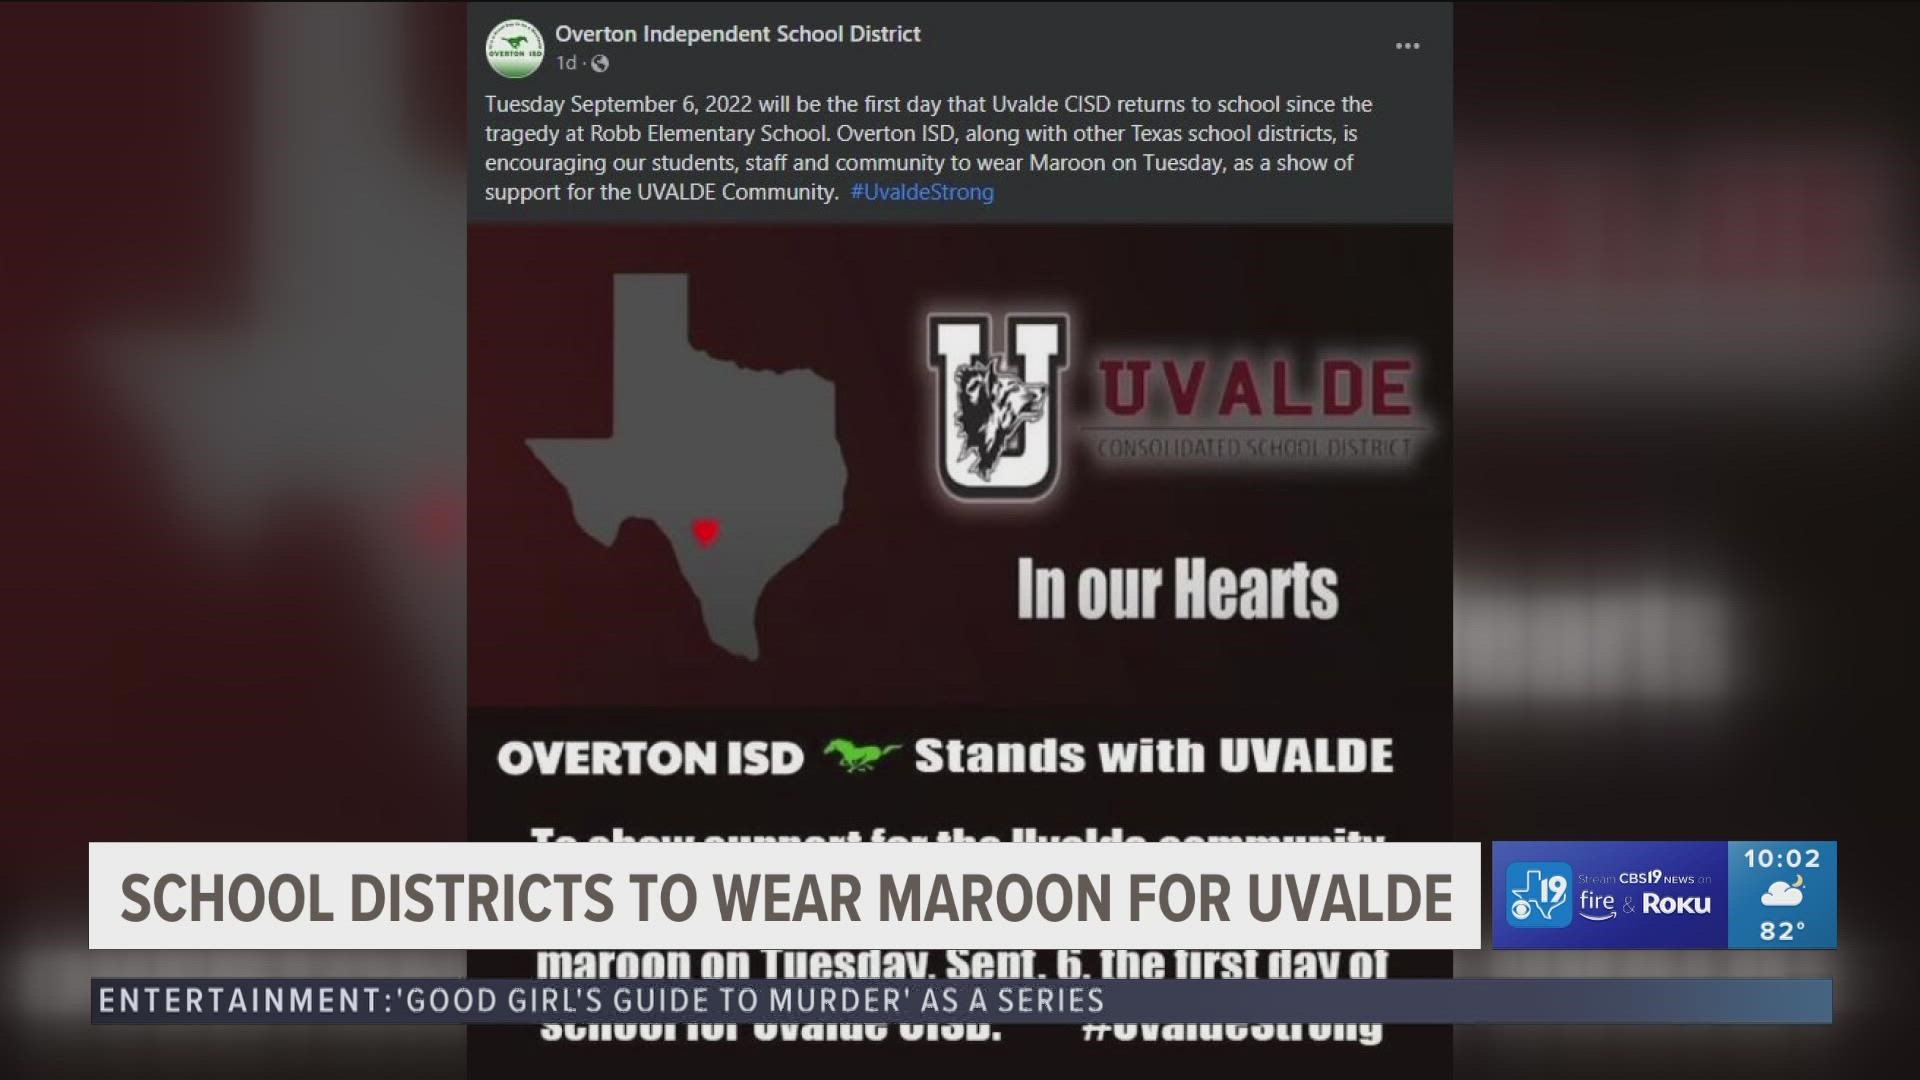 School districts across the nation are encouraging students and staff to wear maroon tomorrow to show support for Uvalde's first day of school.